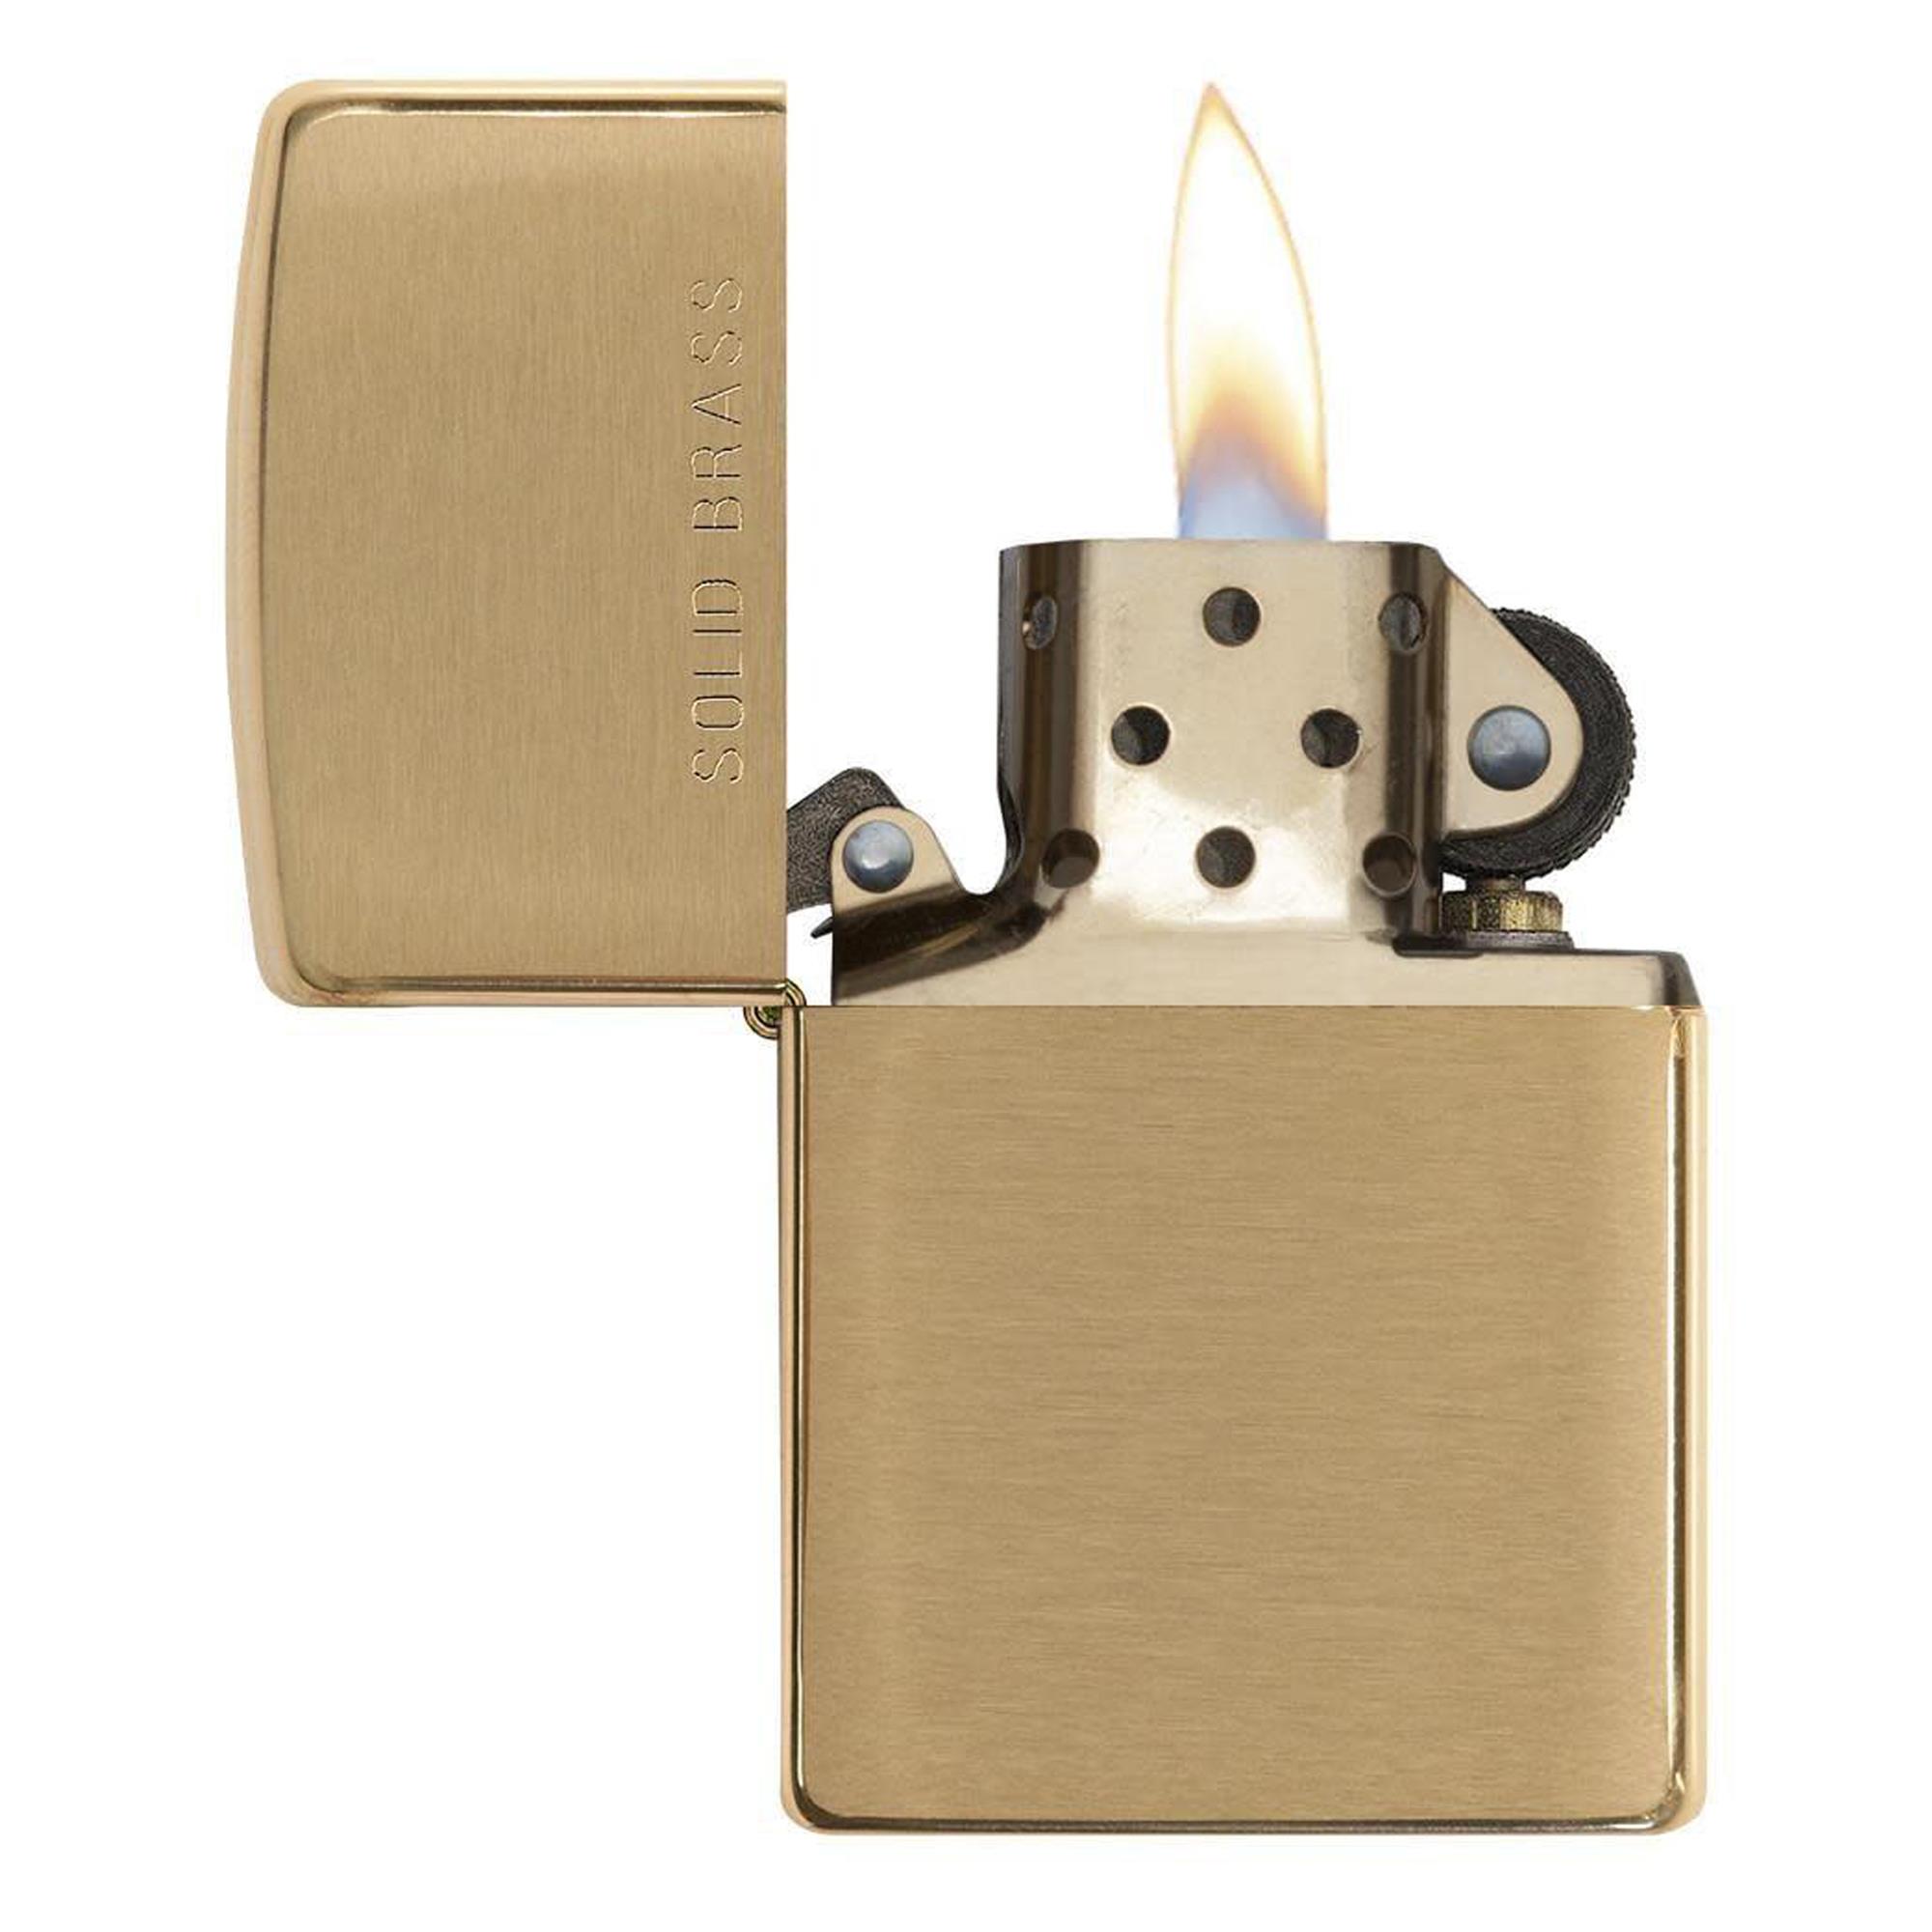 ZIPPO CLASSIC BRUSHED SOLID BRASS